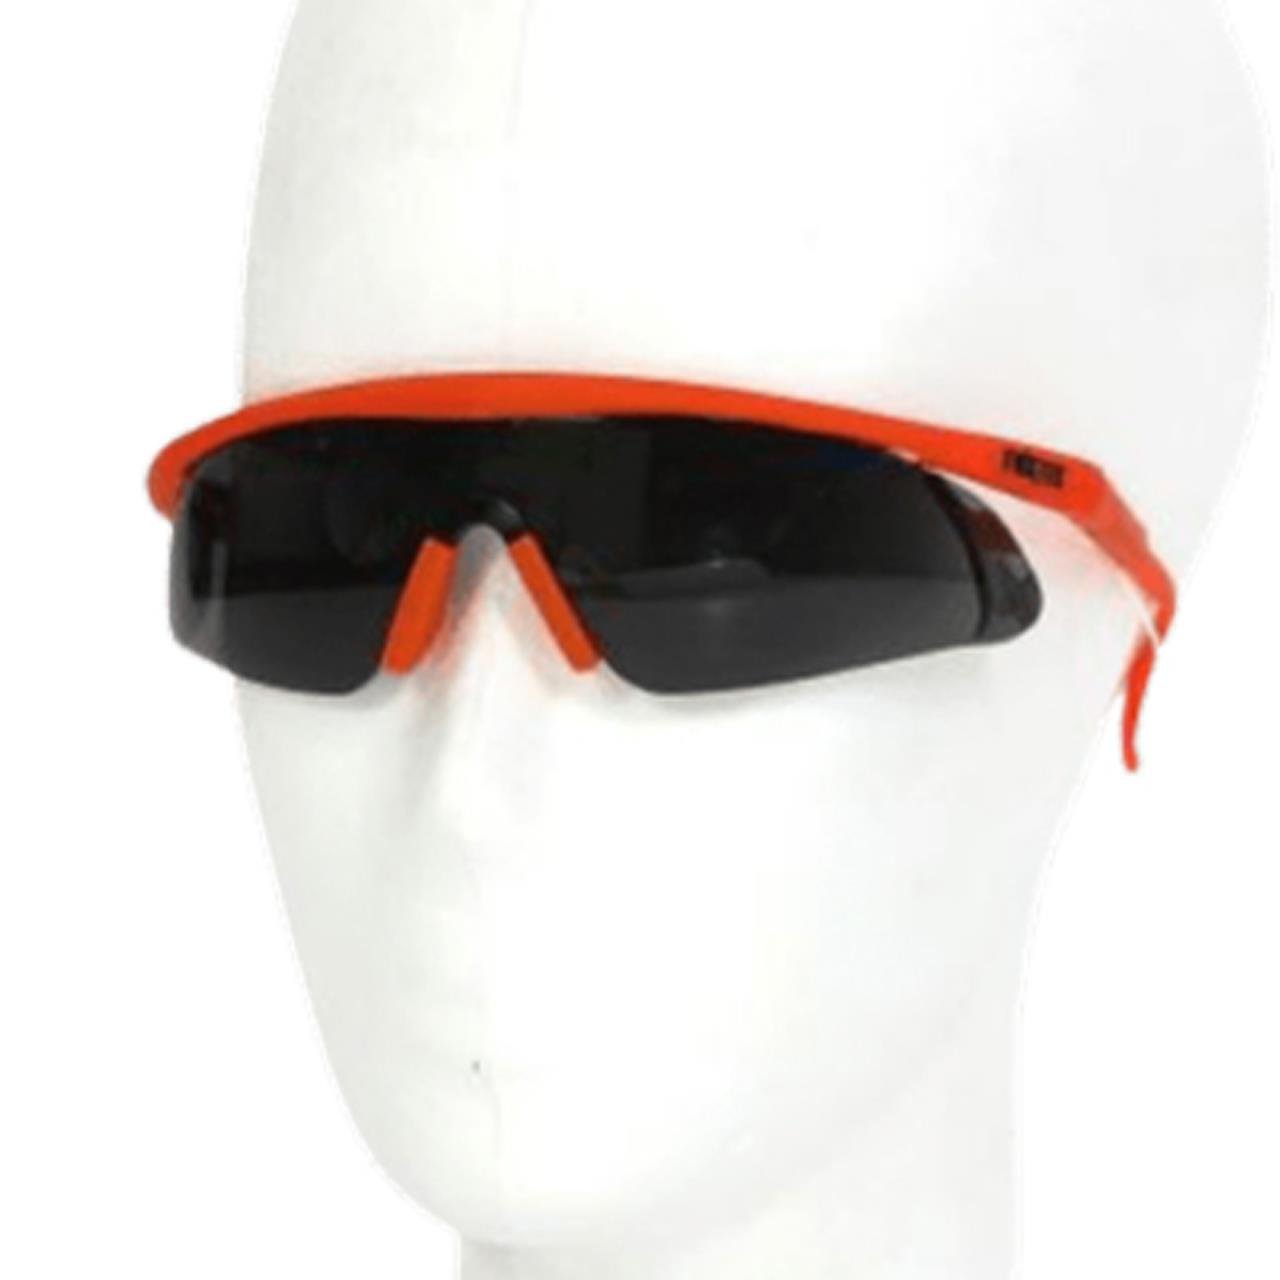 FUXTEC tinted safety glasses/goggles